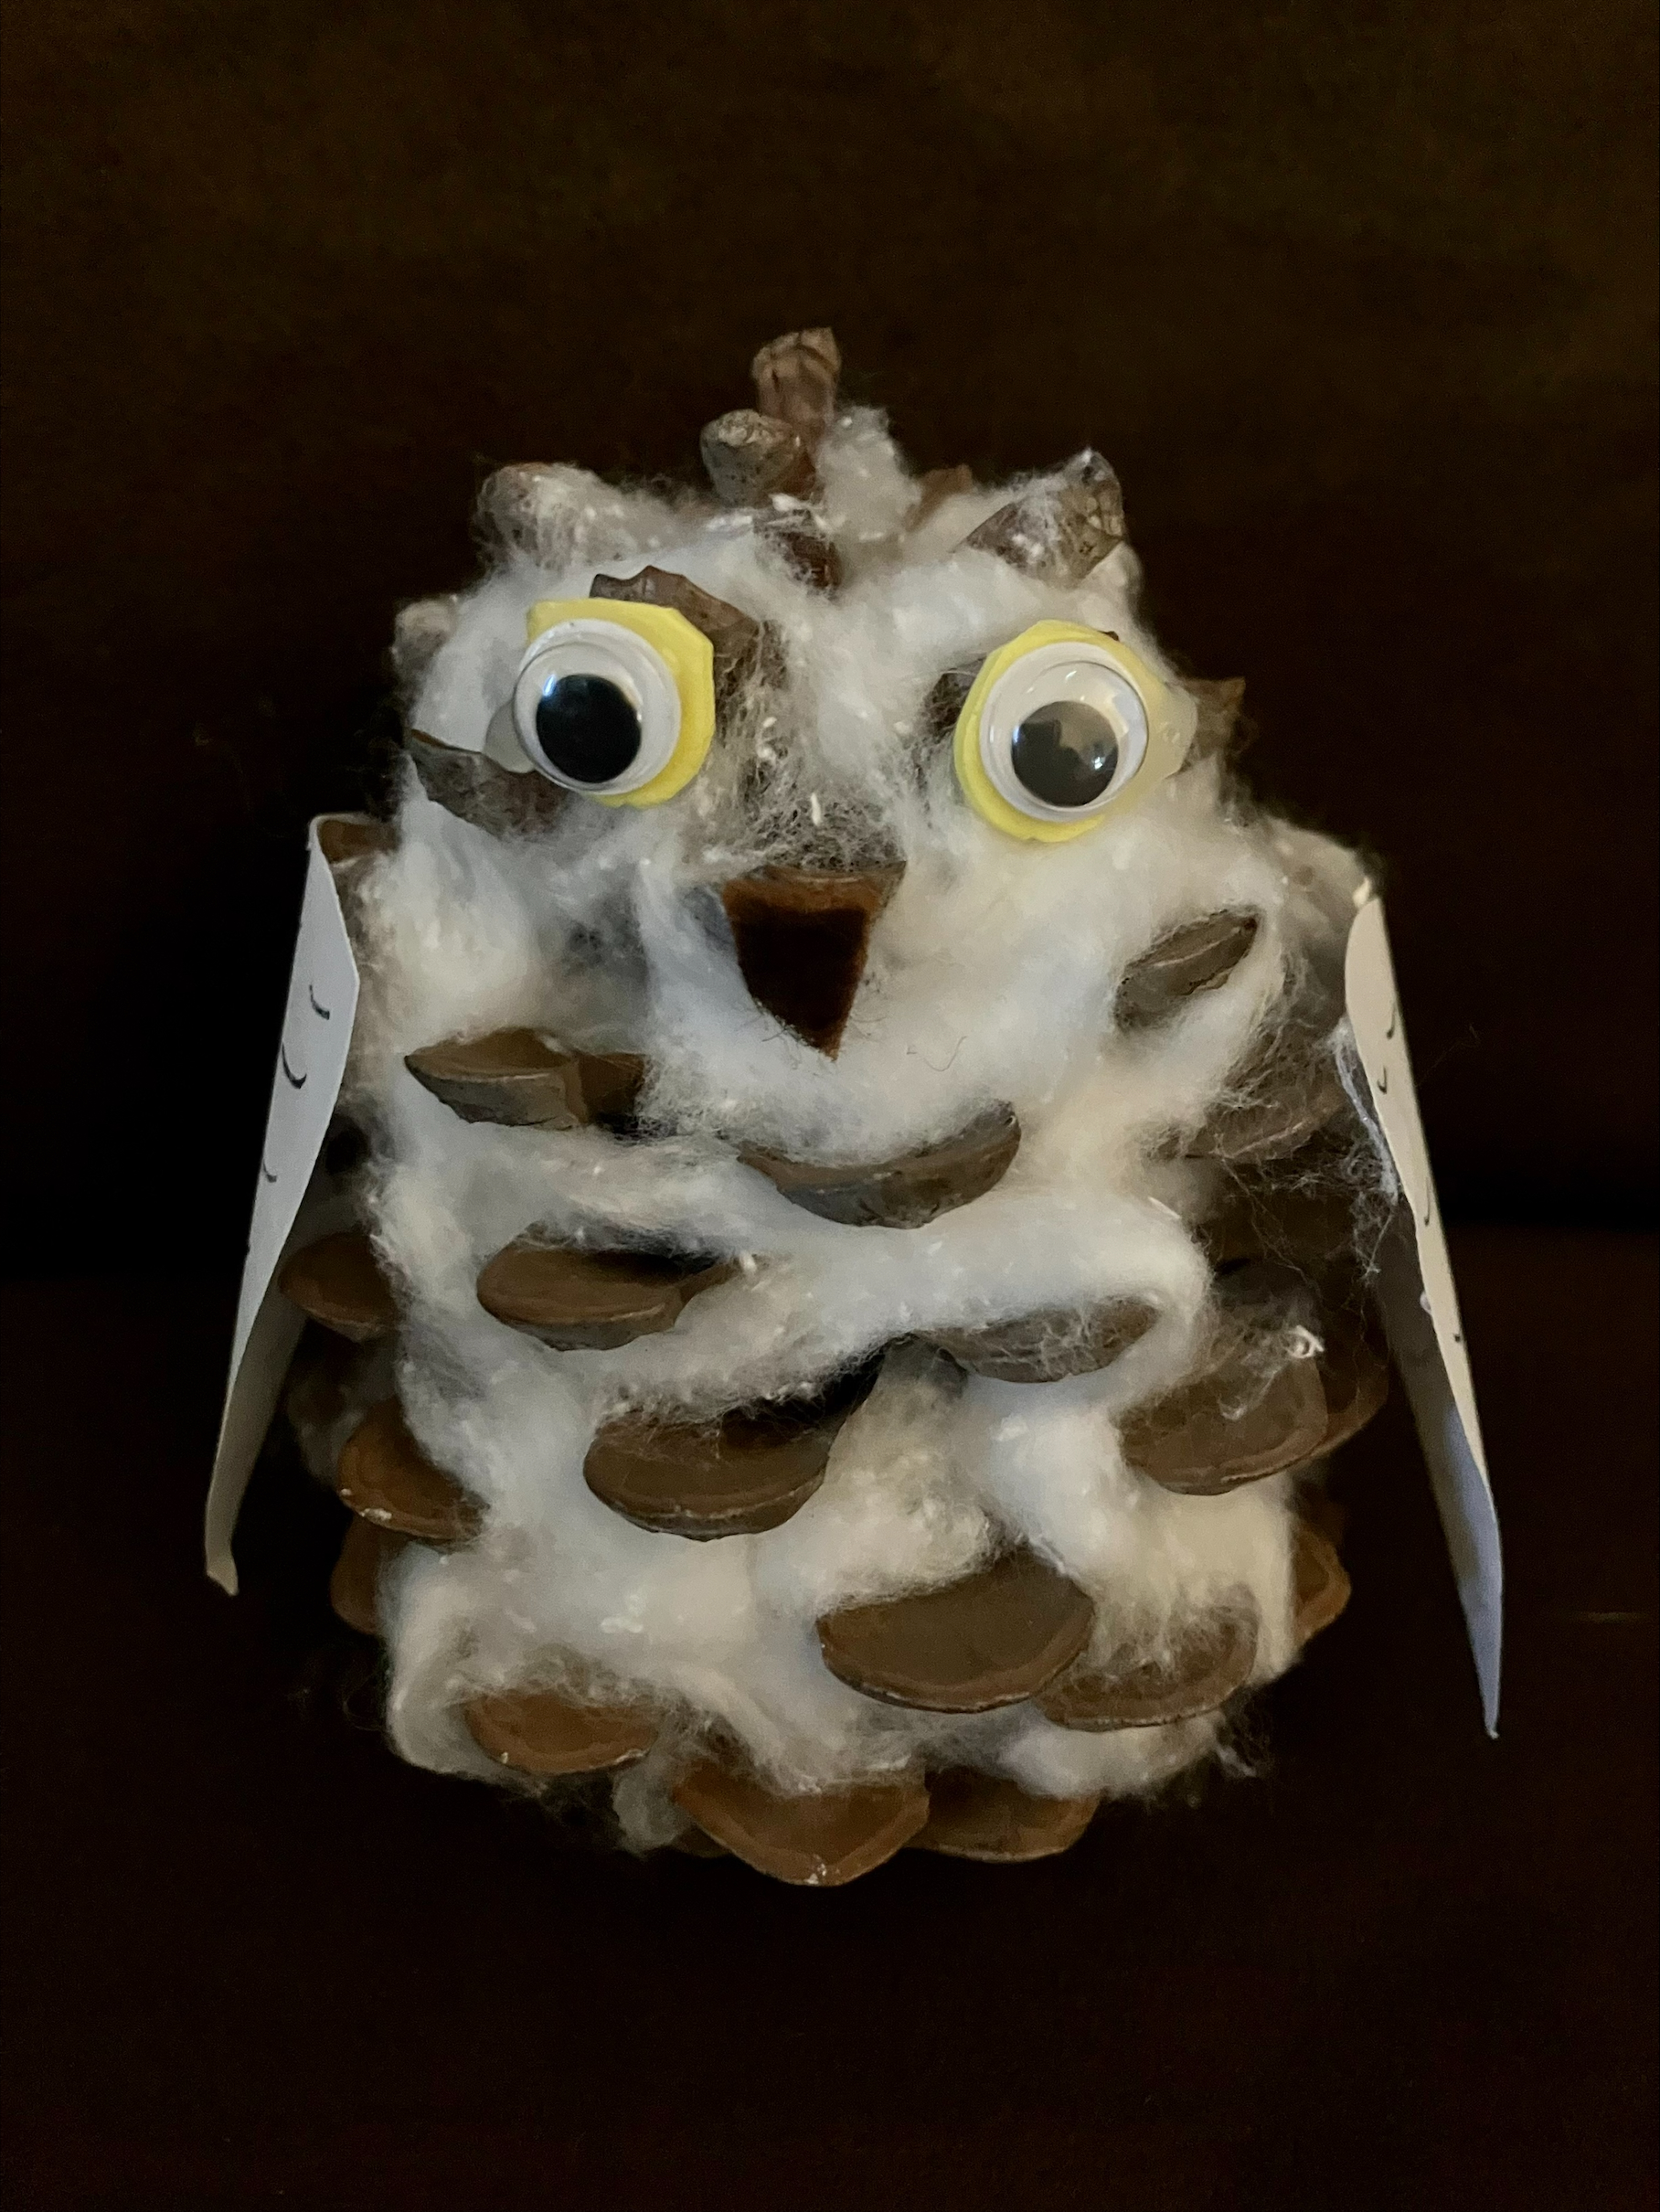 pine cone covered in cotton that looks like an owl